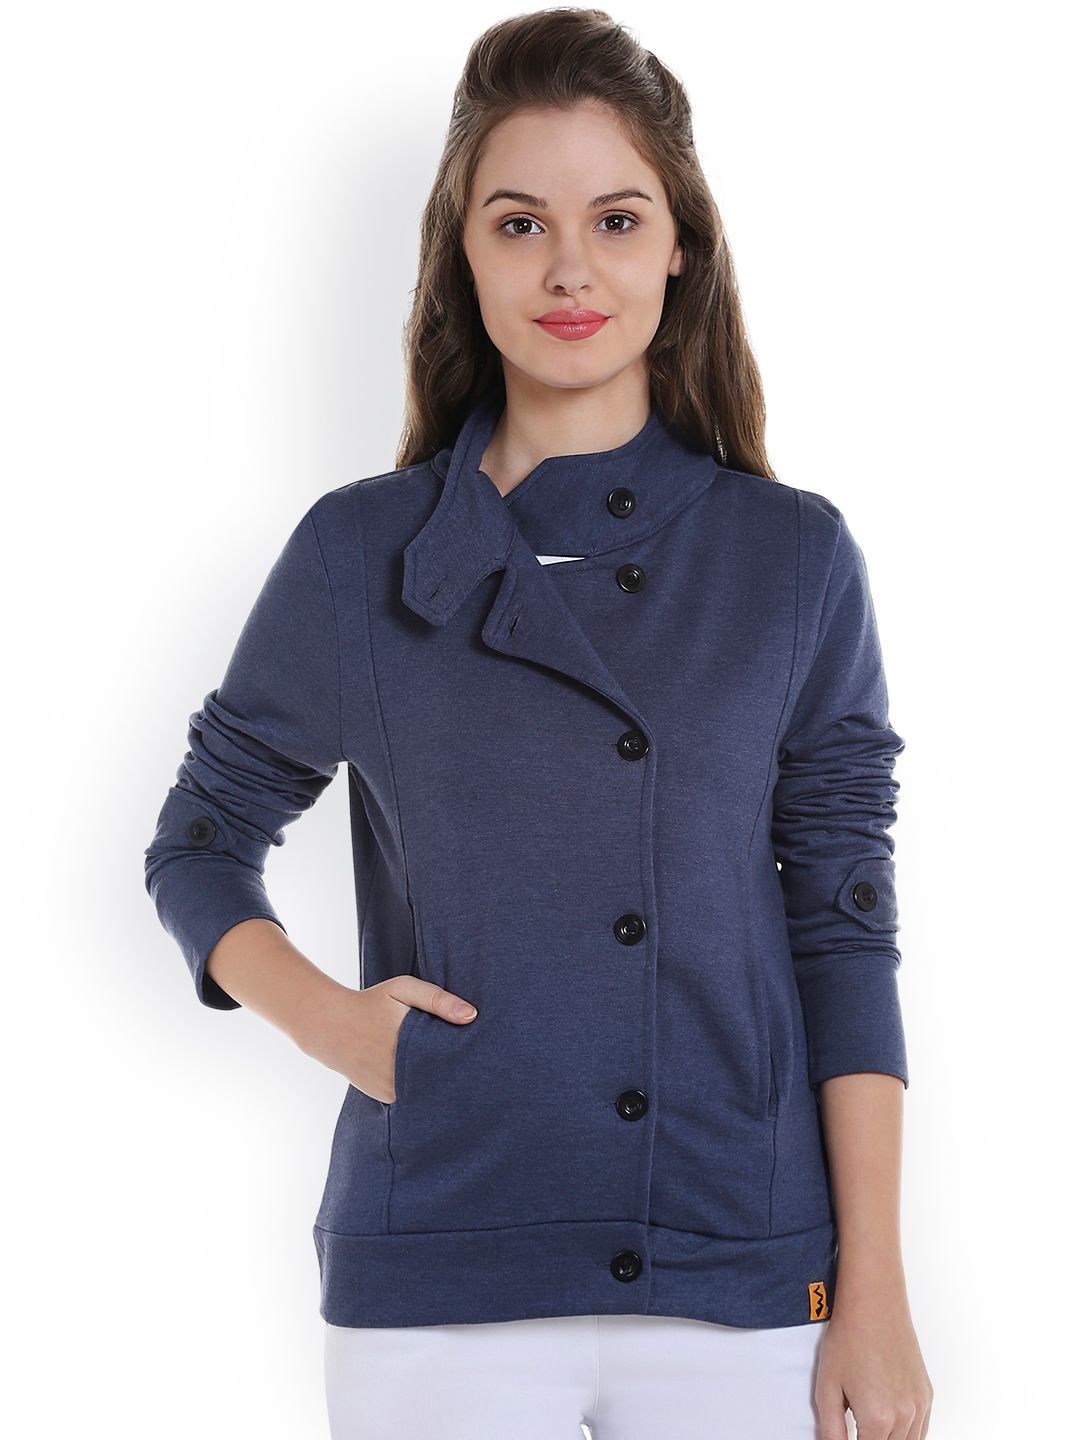 Campus Sutra Women Blue Solid Sporty Jacket Price in India